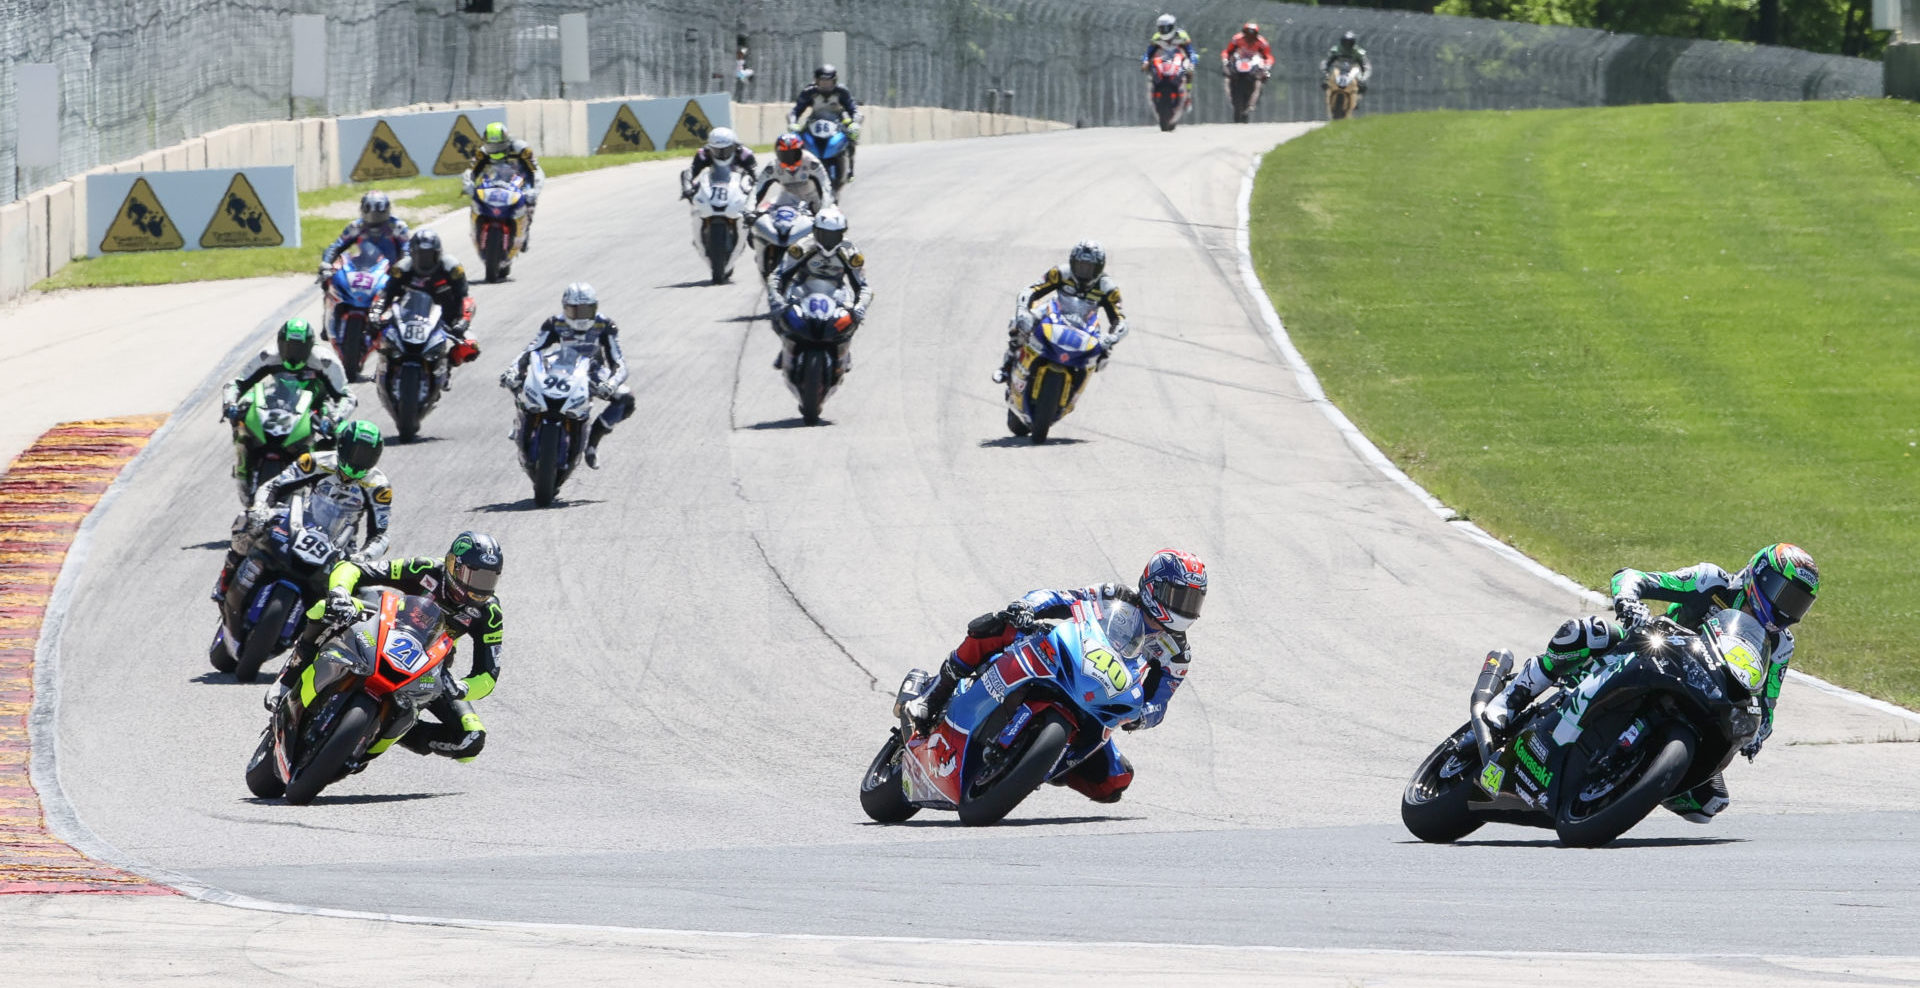 Richie Escalante (54) leads Sean Dylan Kelly (40), Brandon Paasch (21), and the rest of the field during MotoAmerica Supersport Race Two at Road America. Photo by Brian J. Nelson, courtesy MotoAmerica.